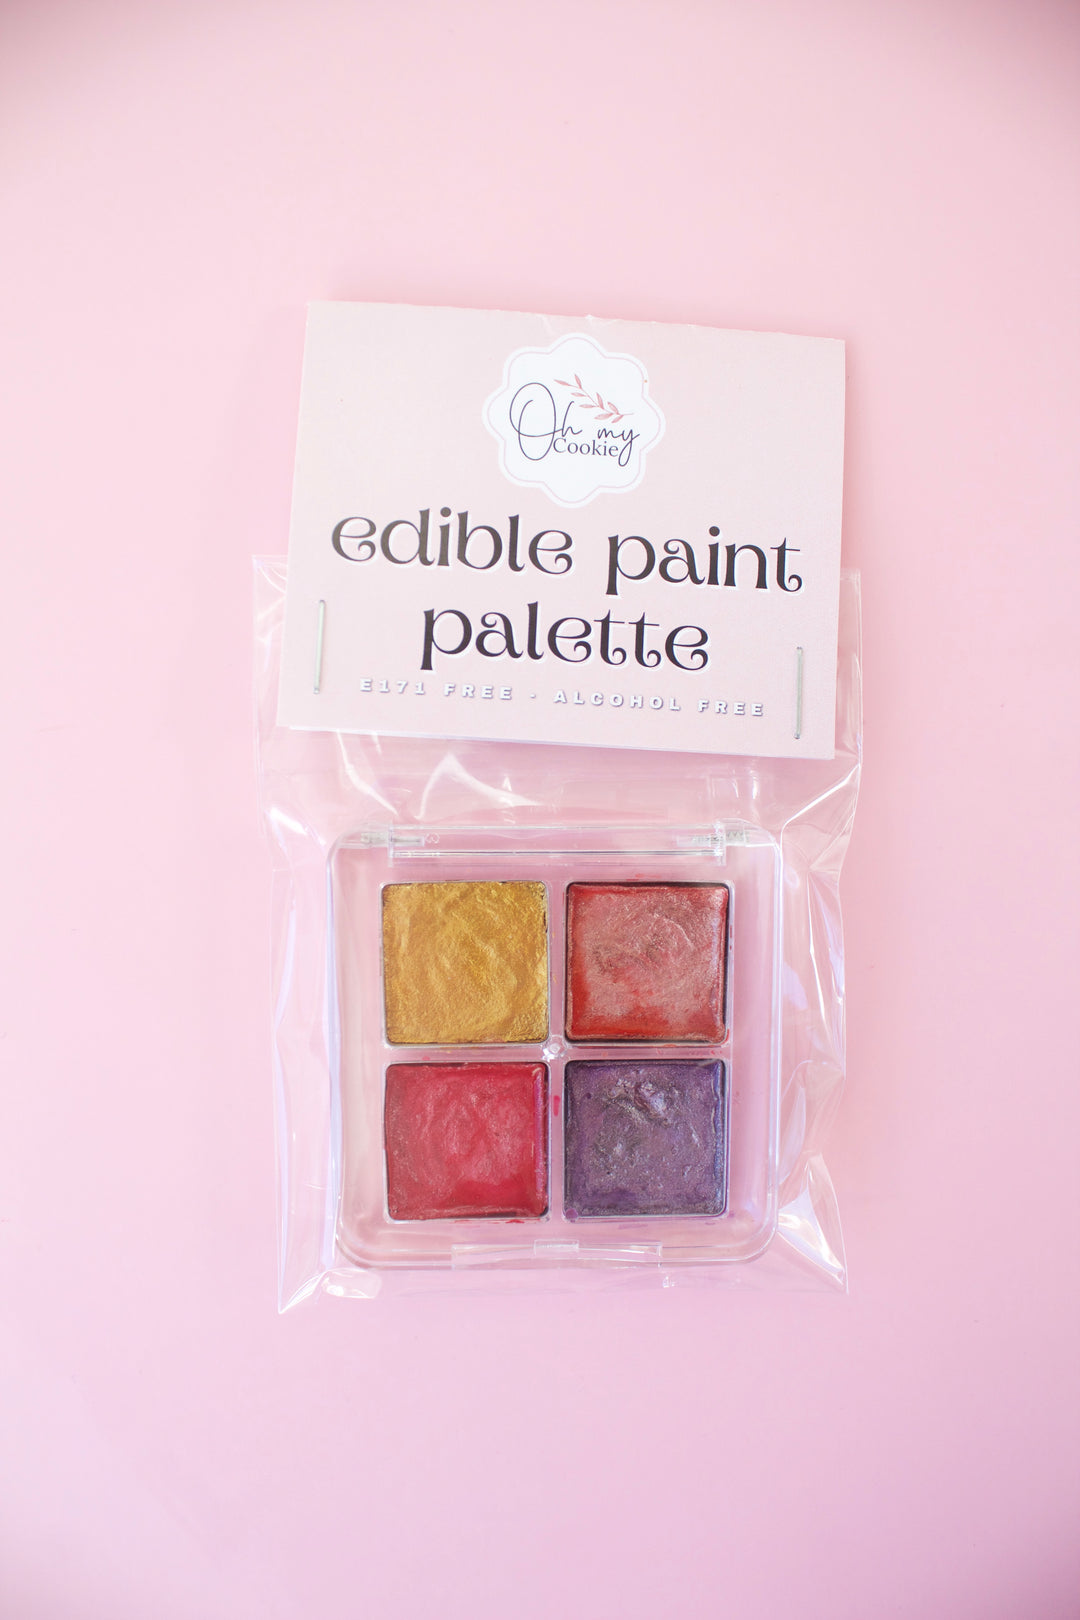 Edible paint palette - Unicorn - Water activated